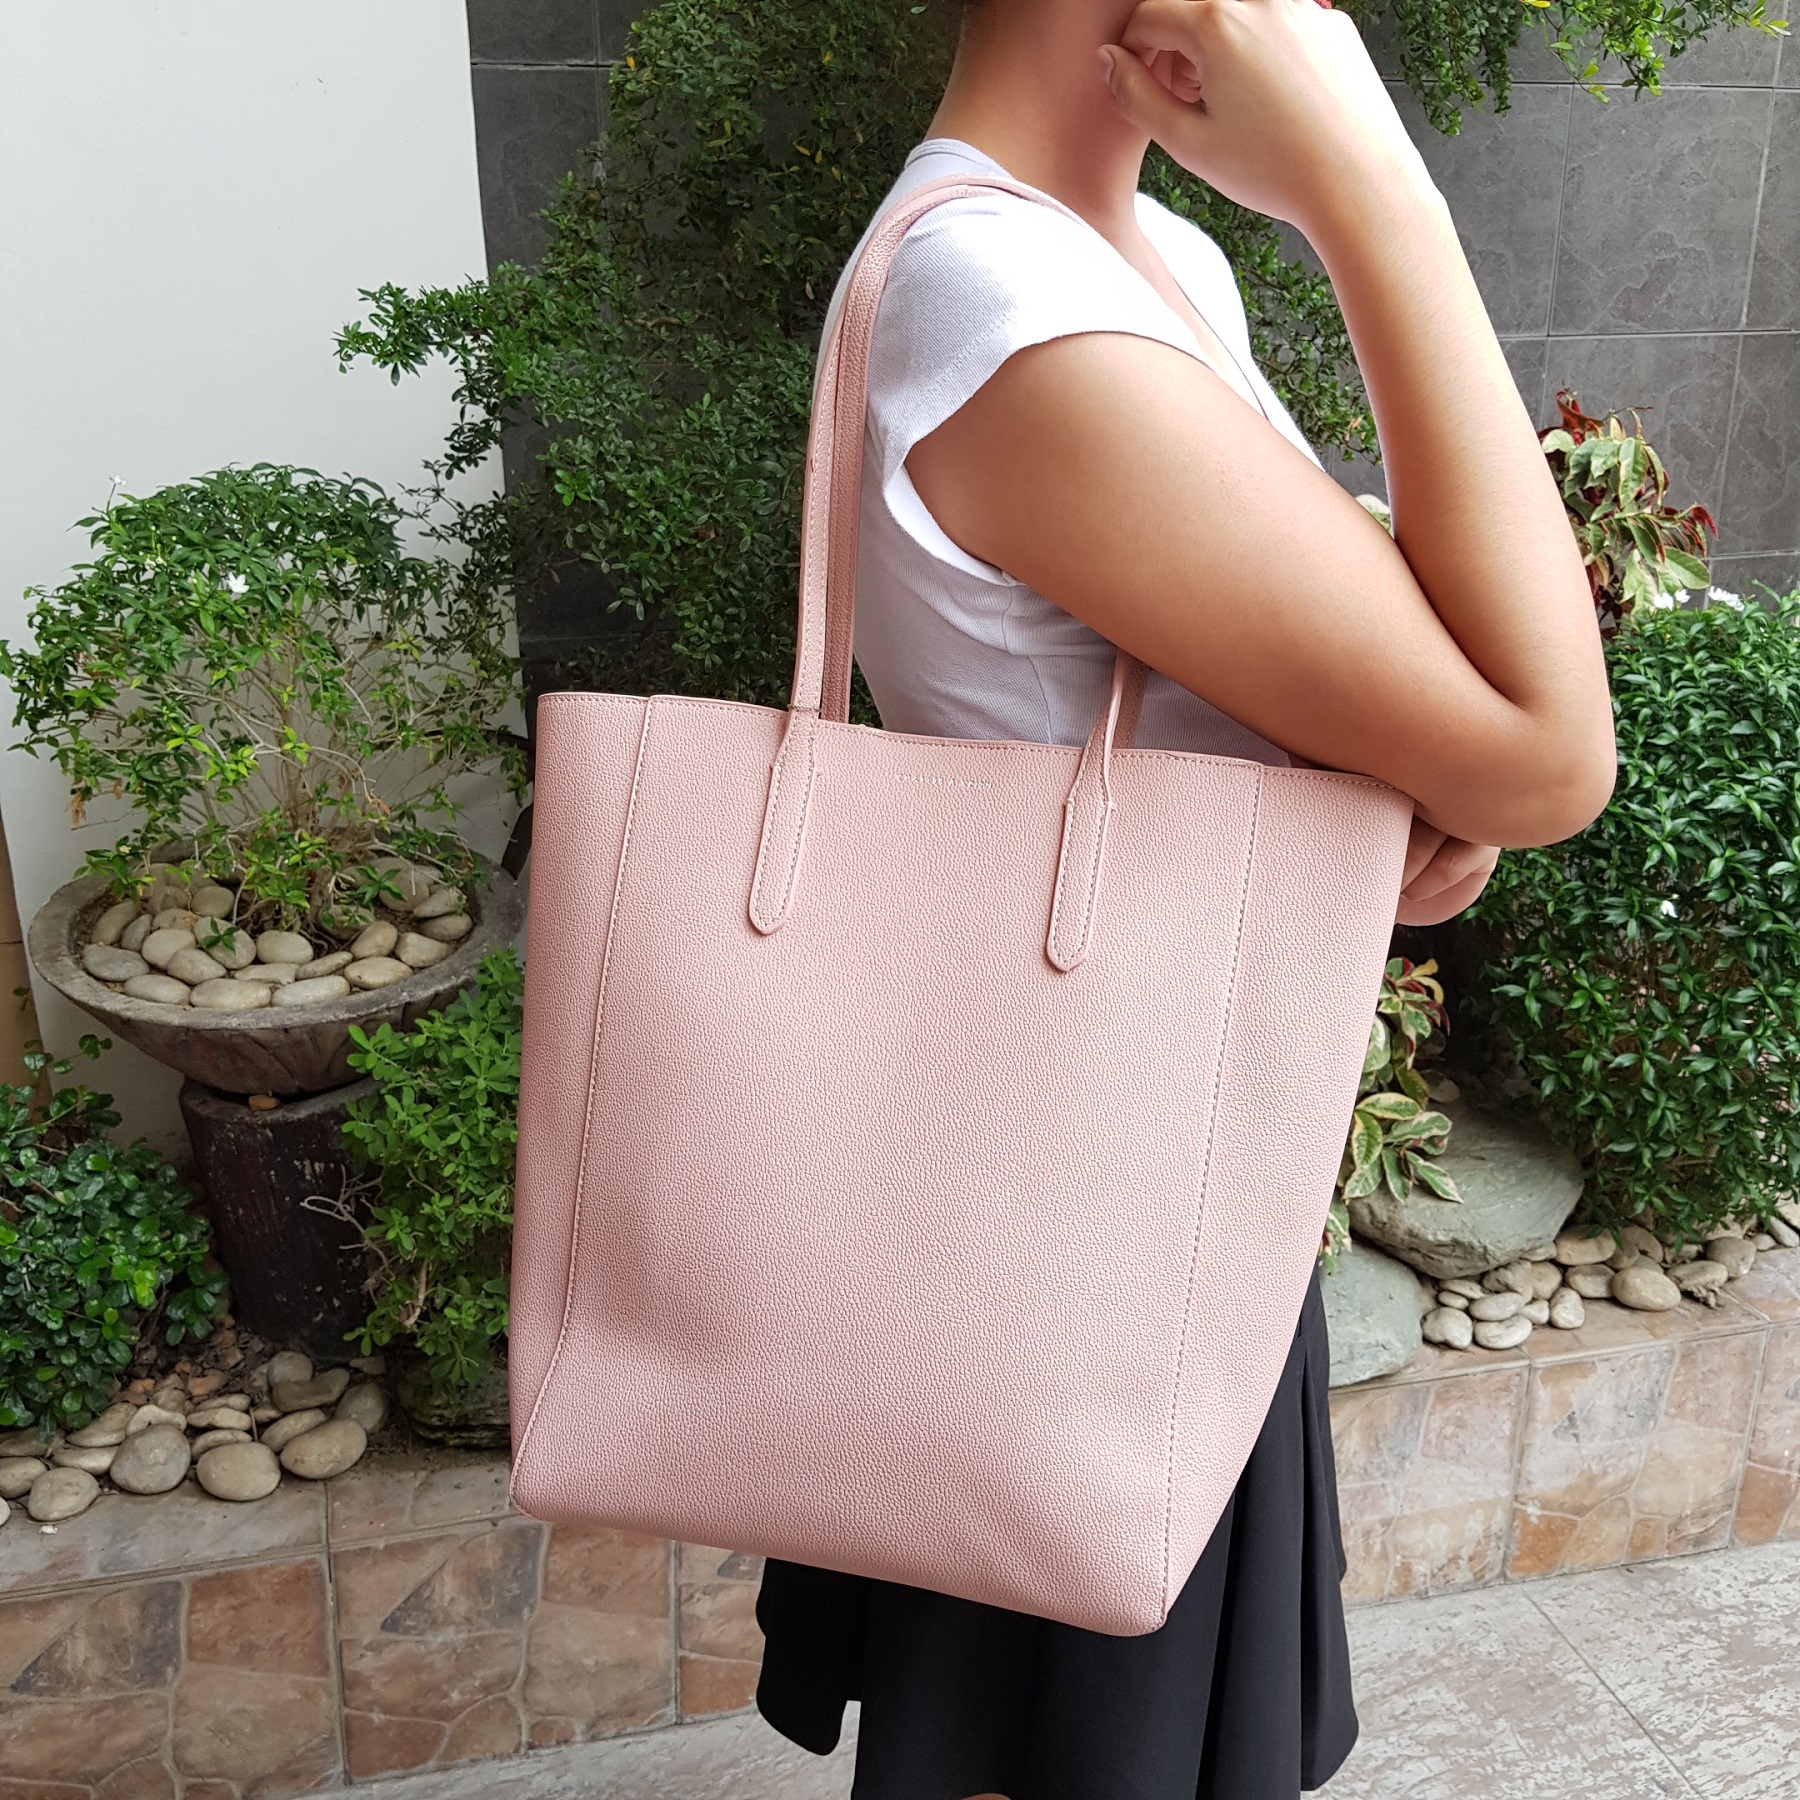 C.H.A.R.L.E.S and K.E.I.T.H Medium Shopper's Bag - Pink Classic